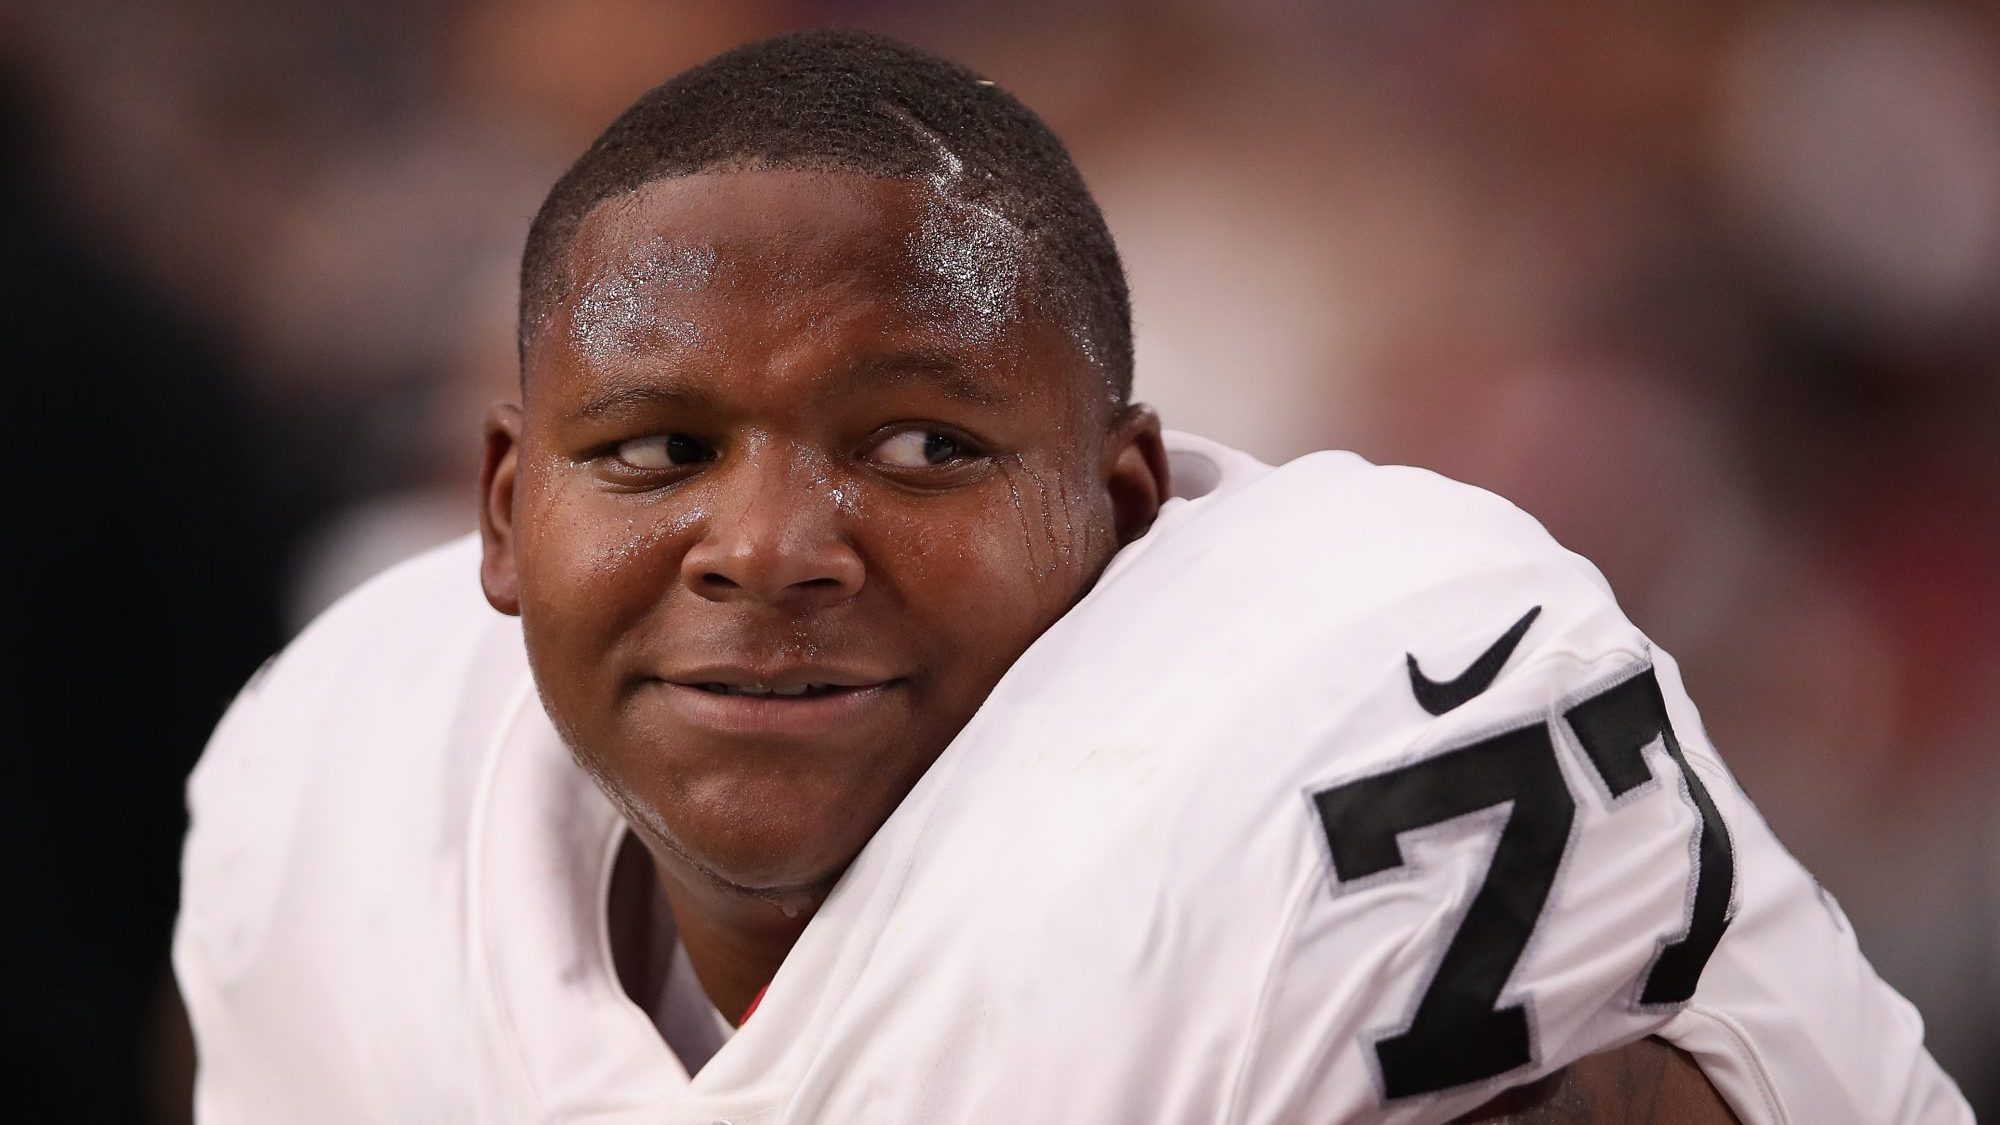 Trent Brown of the Raiders chills on the sideline during a game against the Cardinals earlier this season.